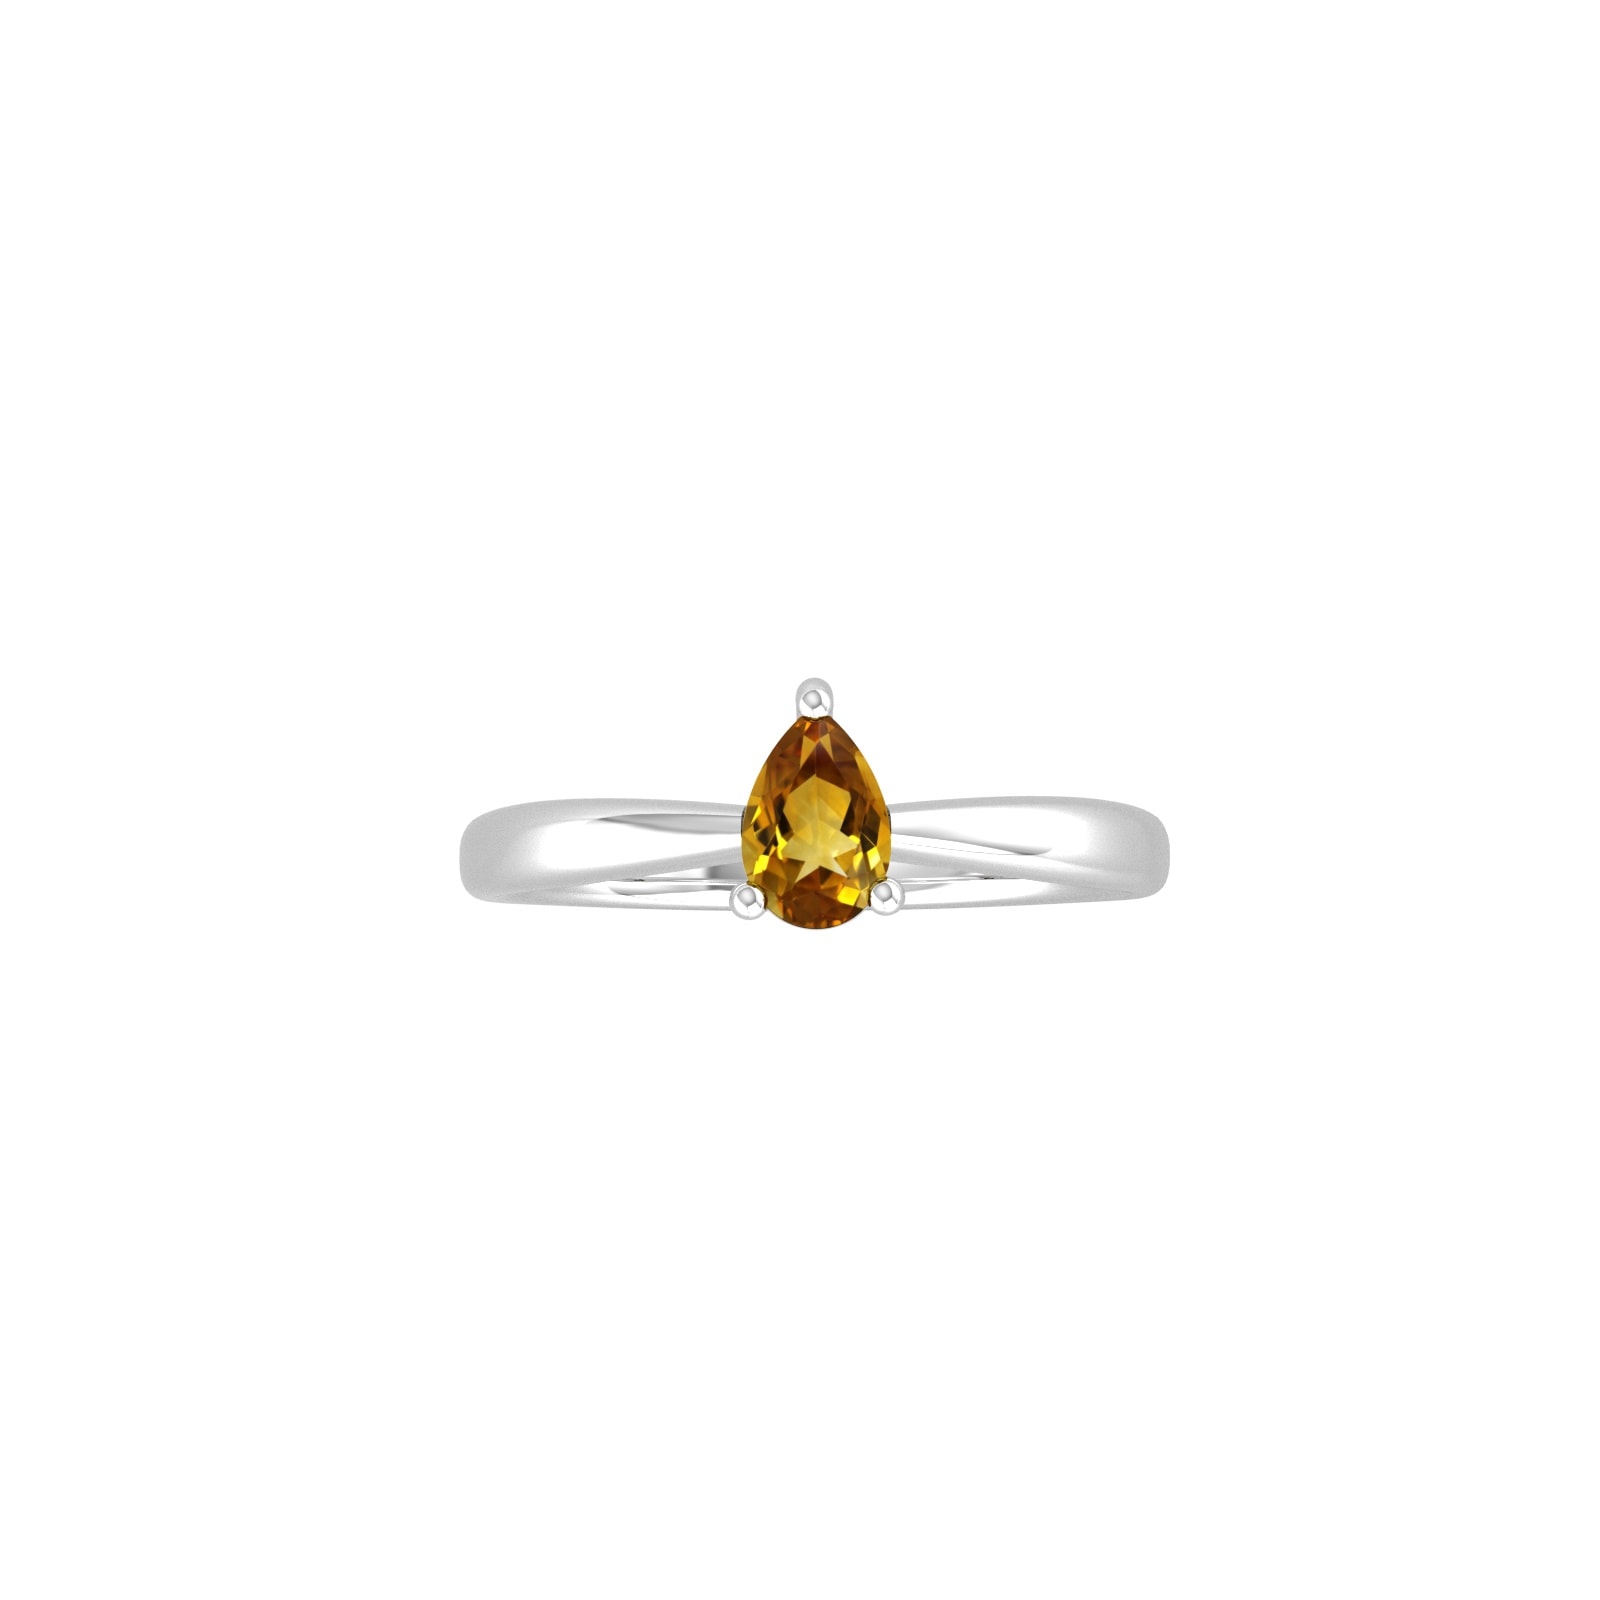 9ct White Gold 4 Claw Pear Cut Citrine Ring